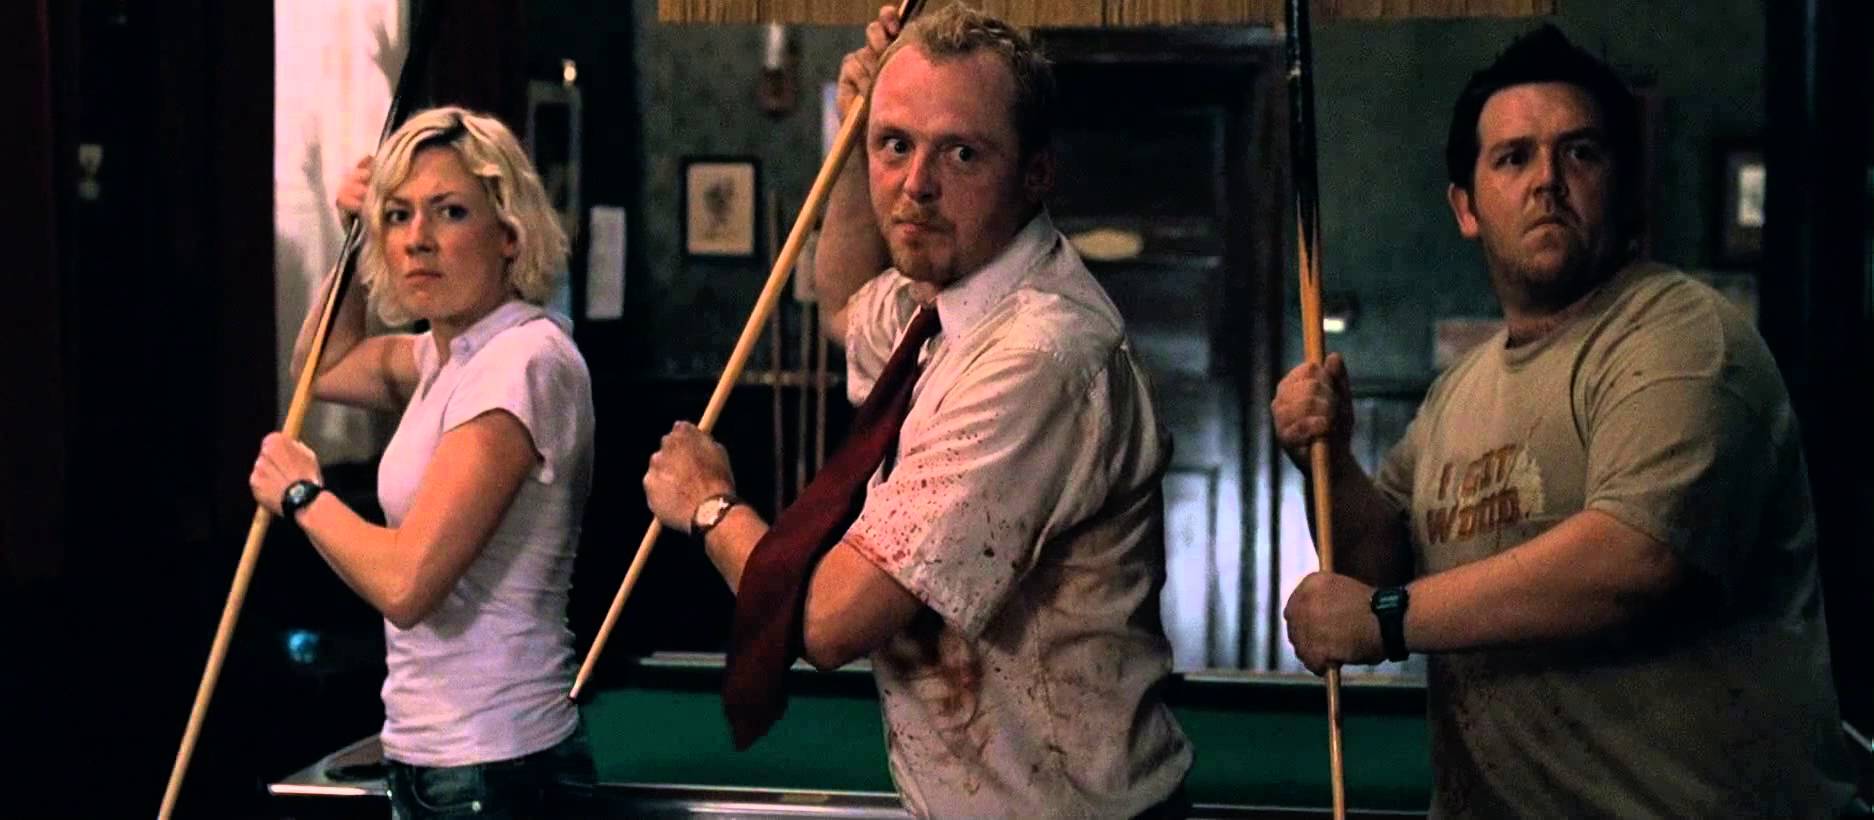 Nice Images Collection: Shaun Of The Dead Desktop Wallpapers